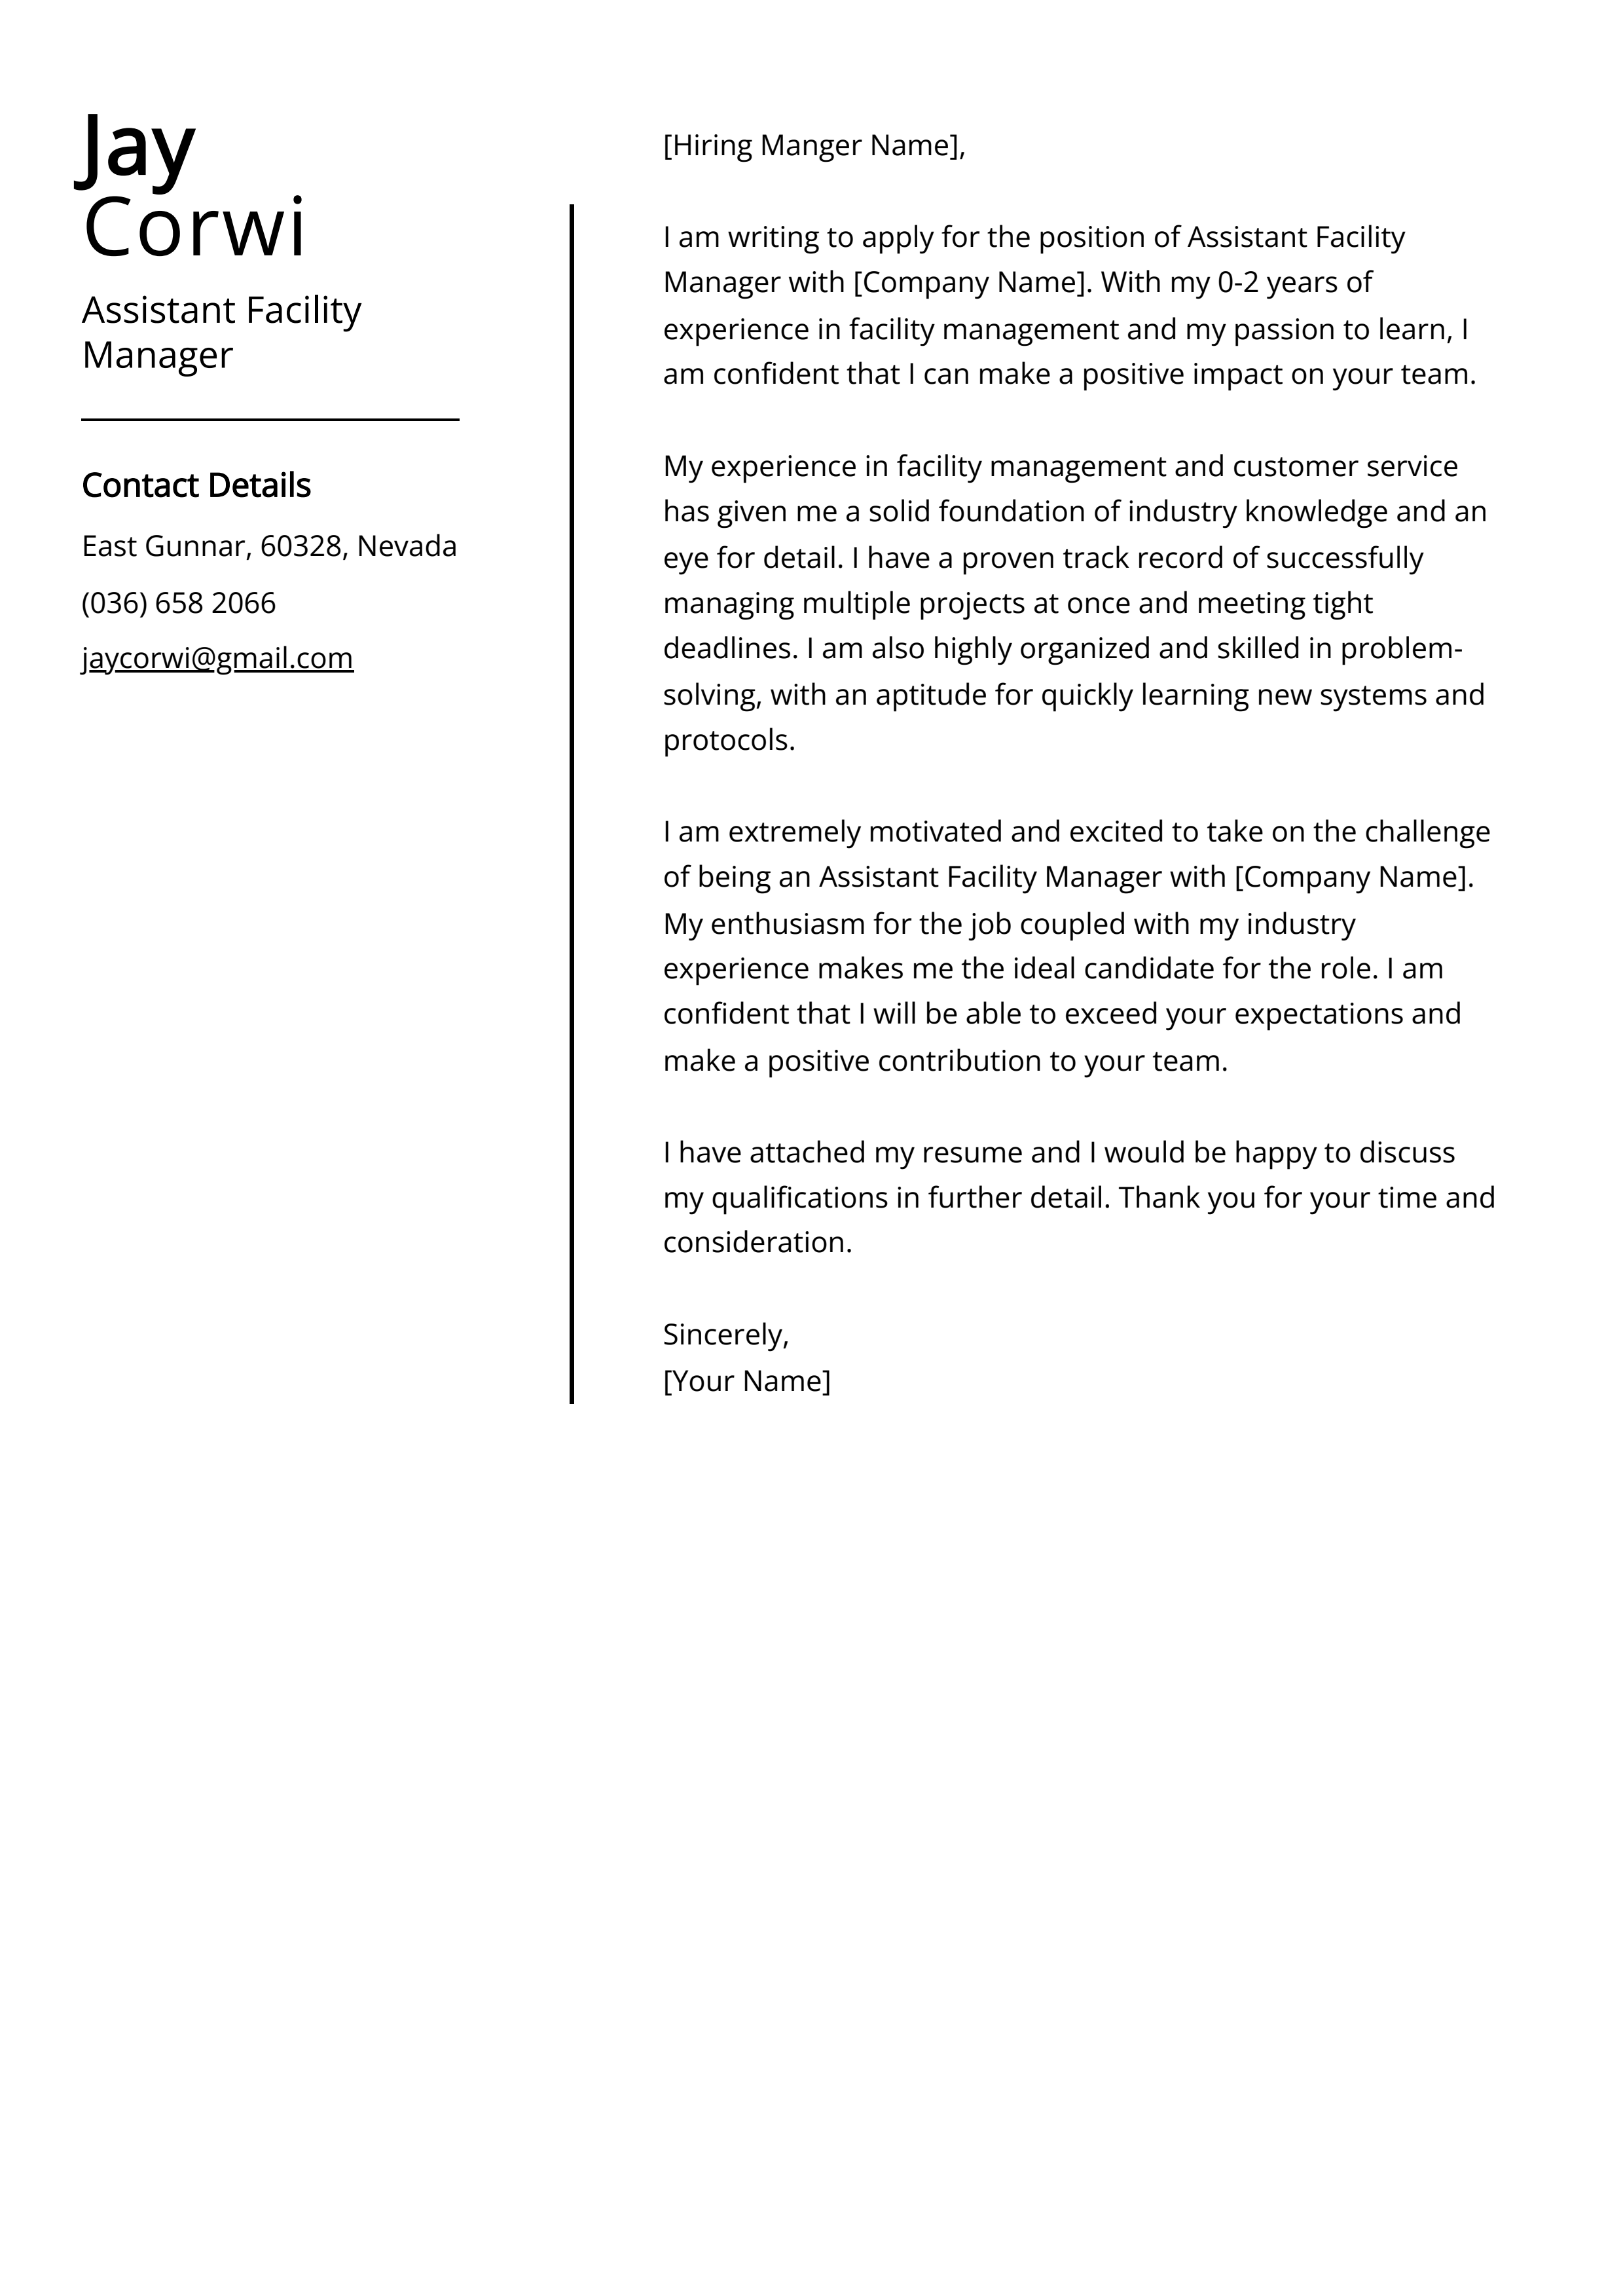 Assistant Facility Manager Cover Letter Example